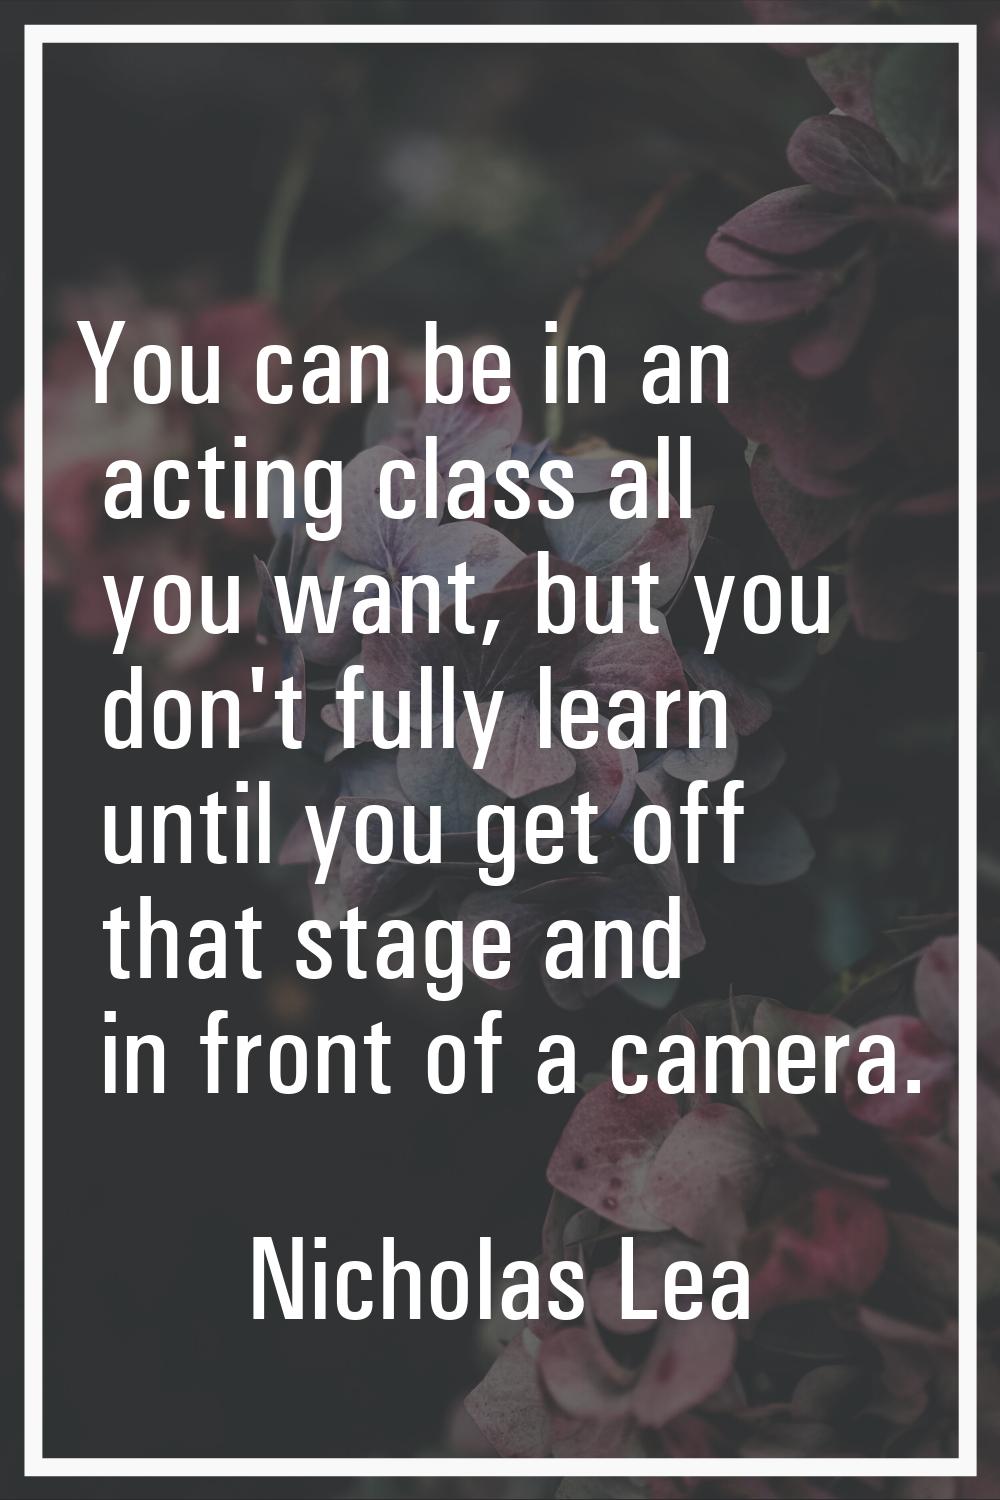 You can be in an acting class all you want, but you don't fully learn until you get off that stage 